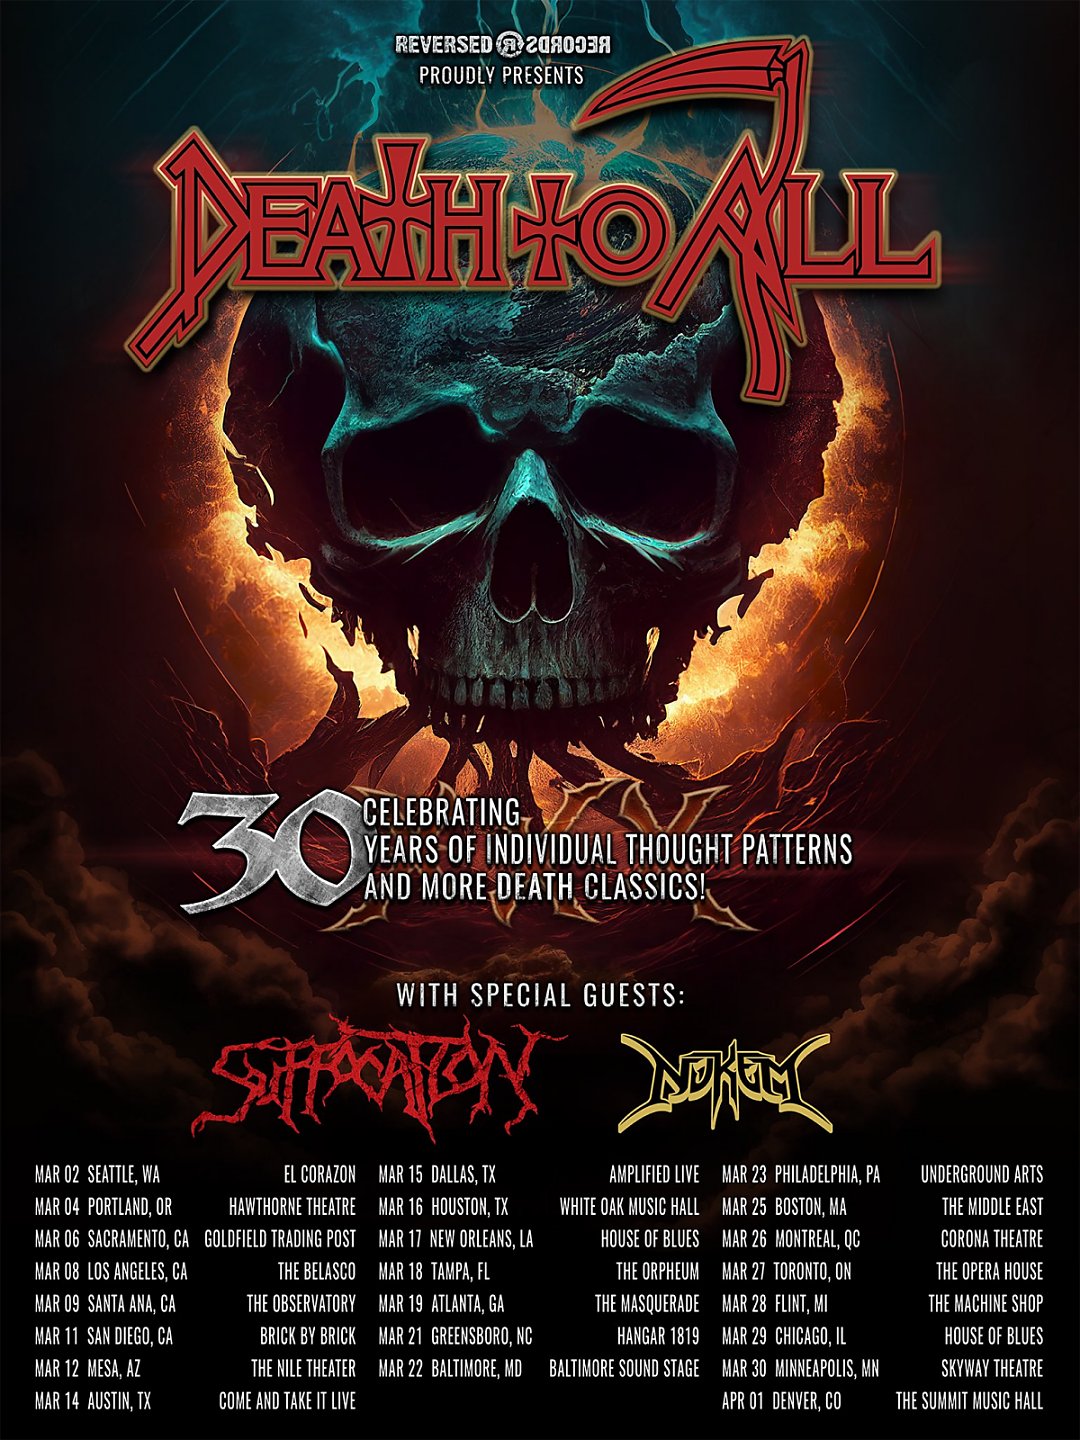 DEATH TO ALL tour and dates